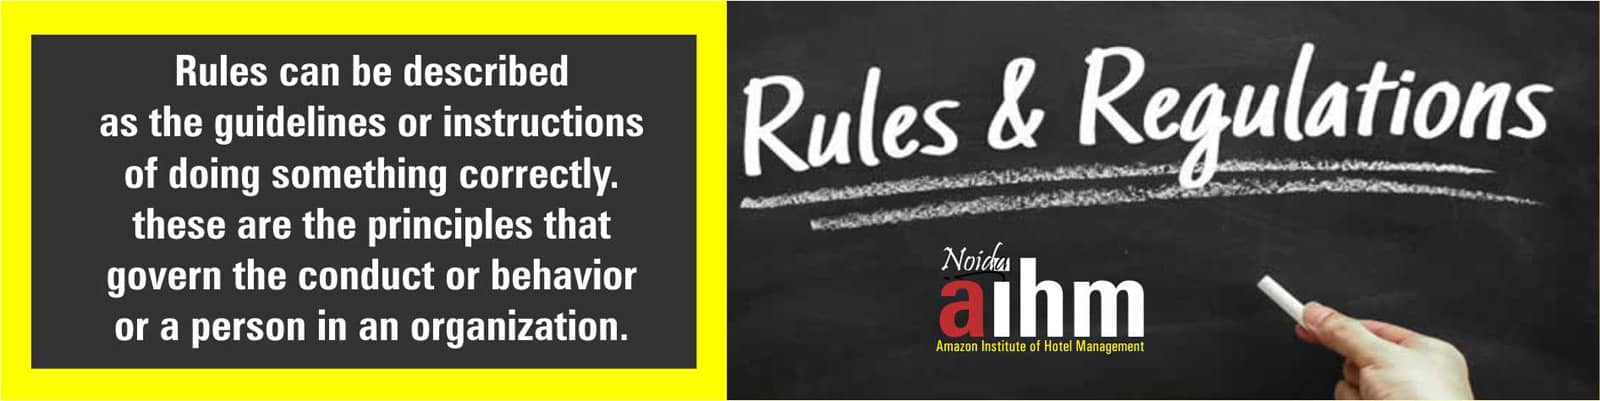 rule-and-regulations